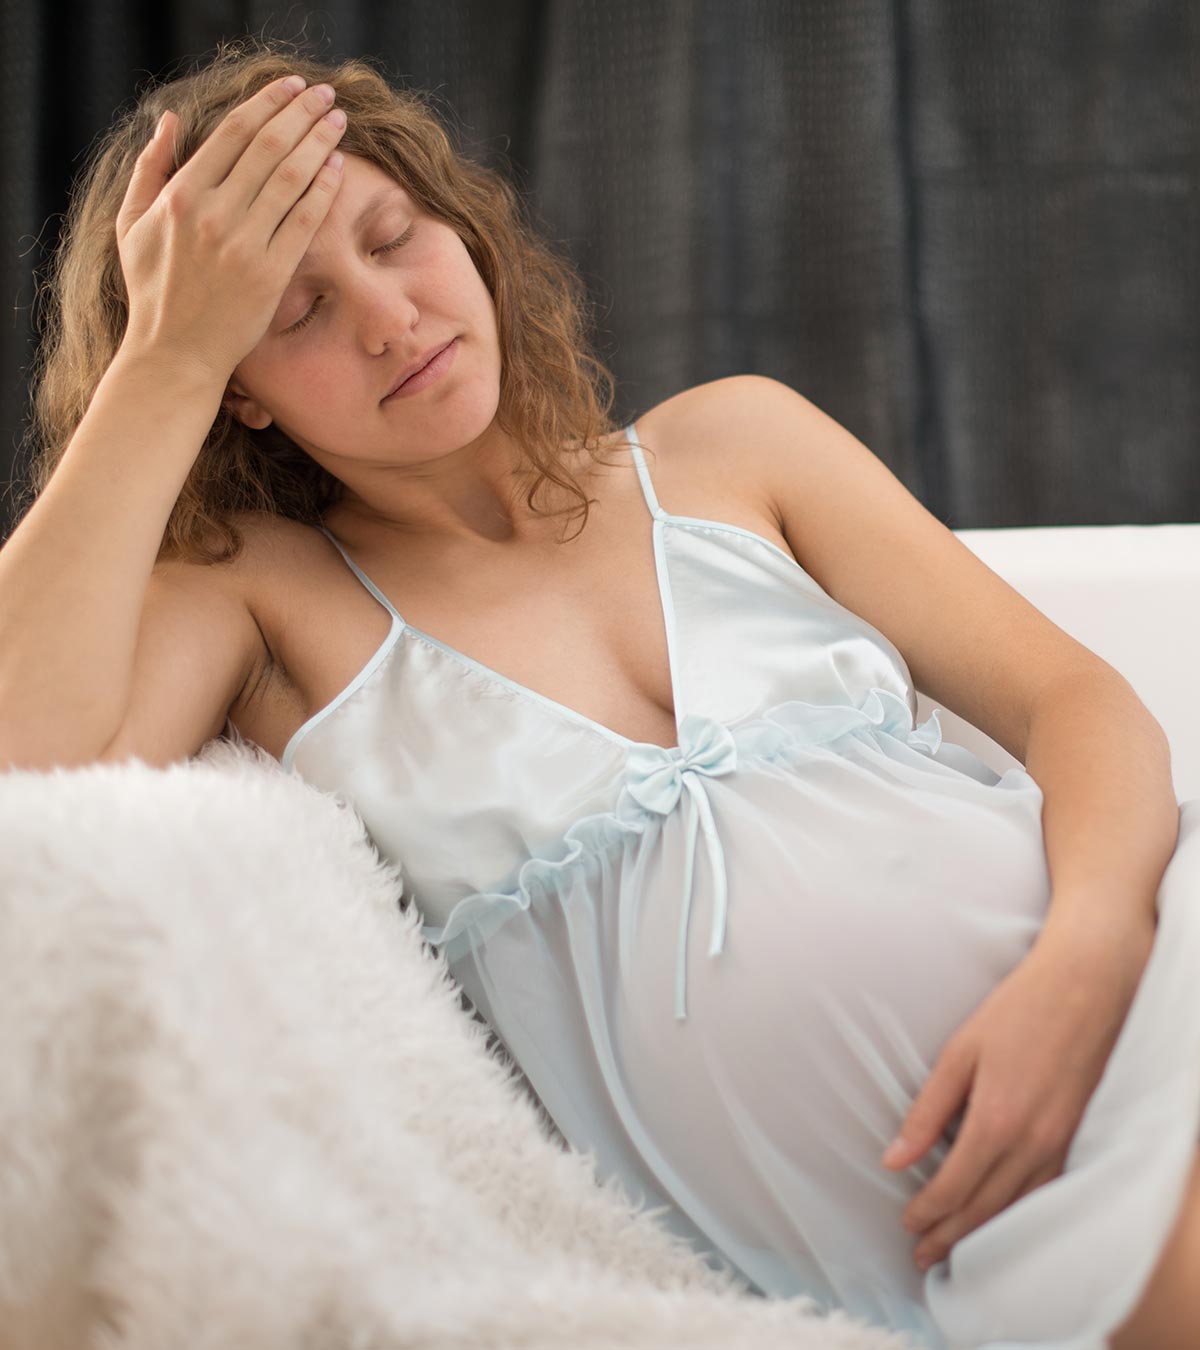 Bleeding After Sex During Pregnancy: Is this Normal?